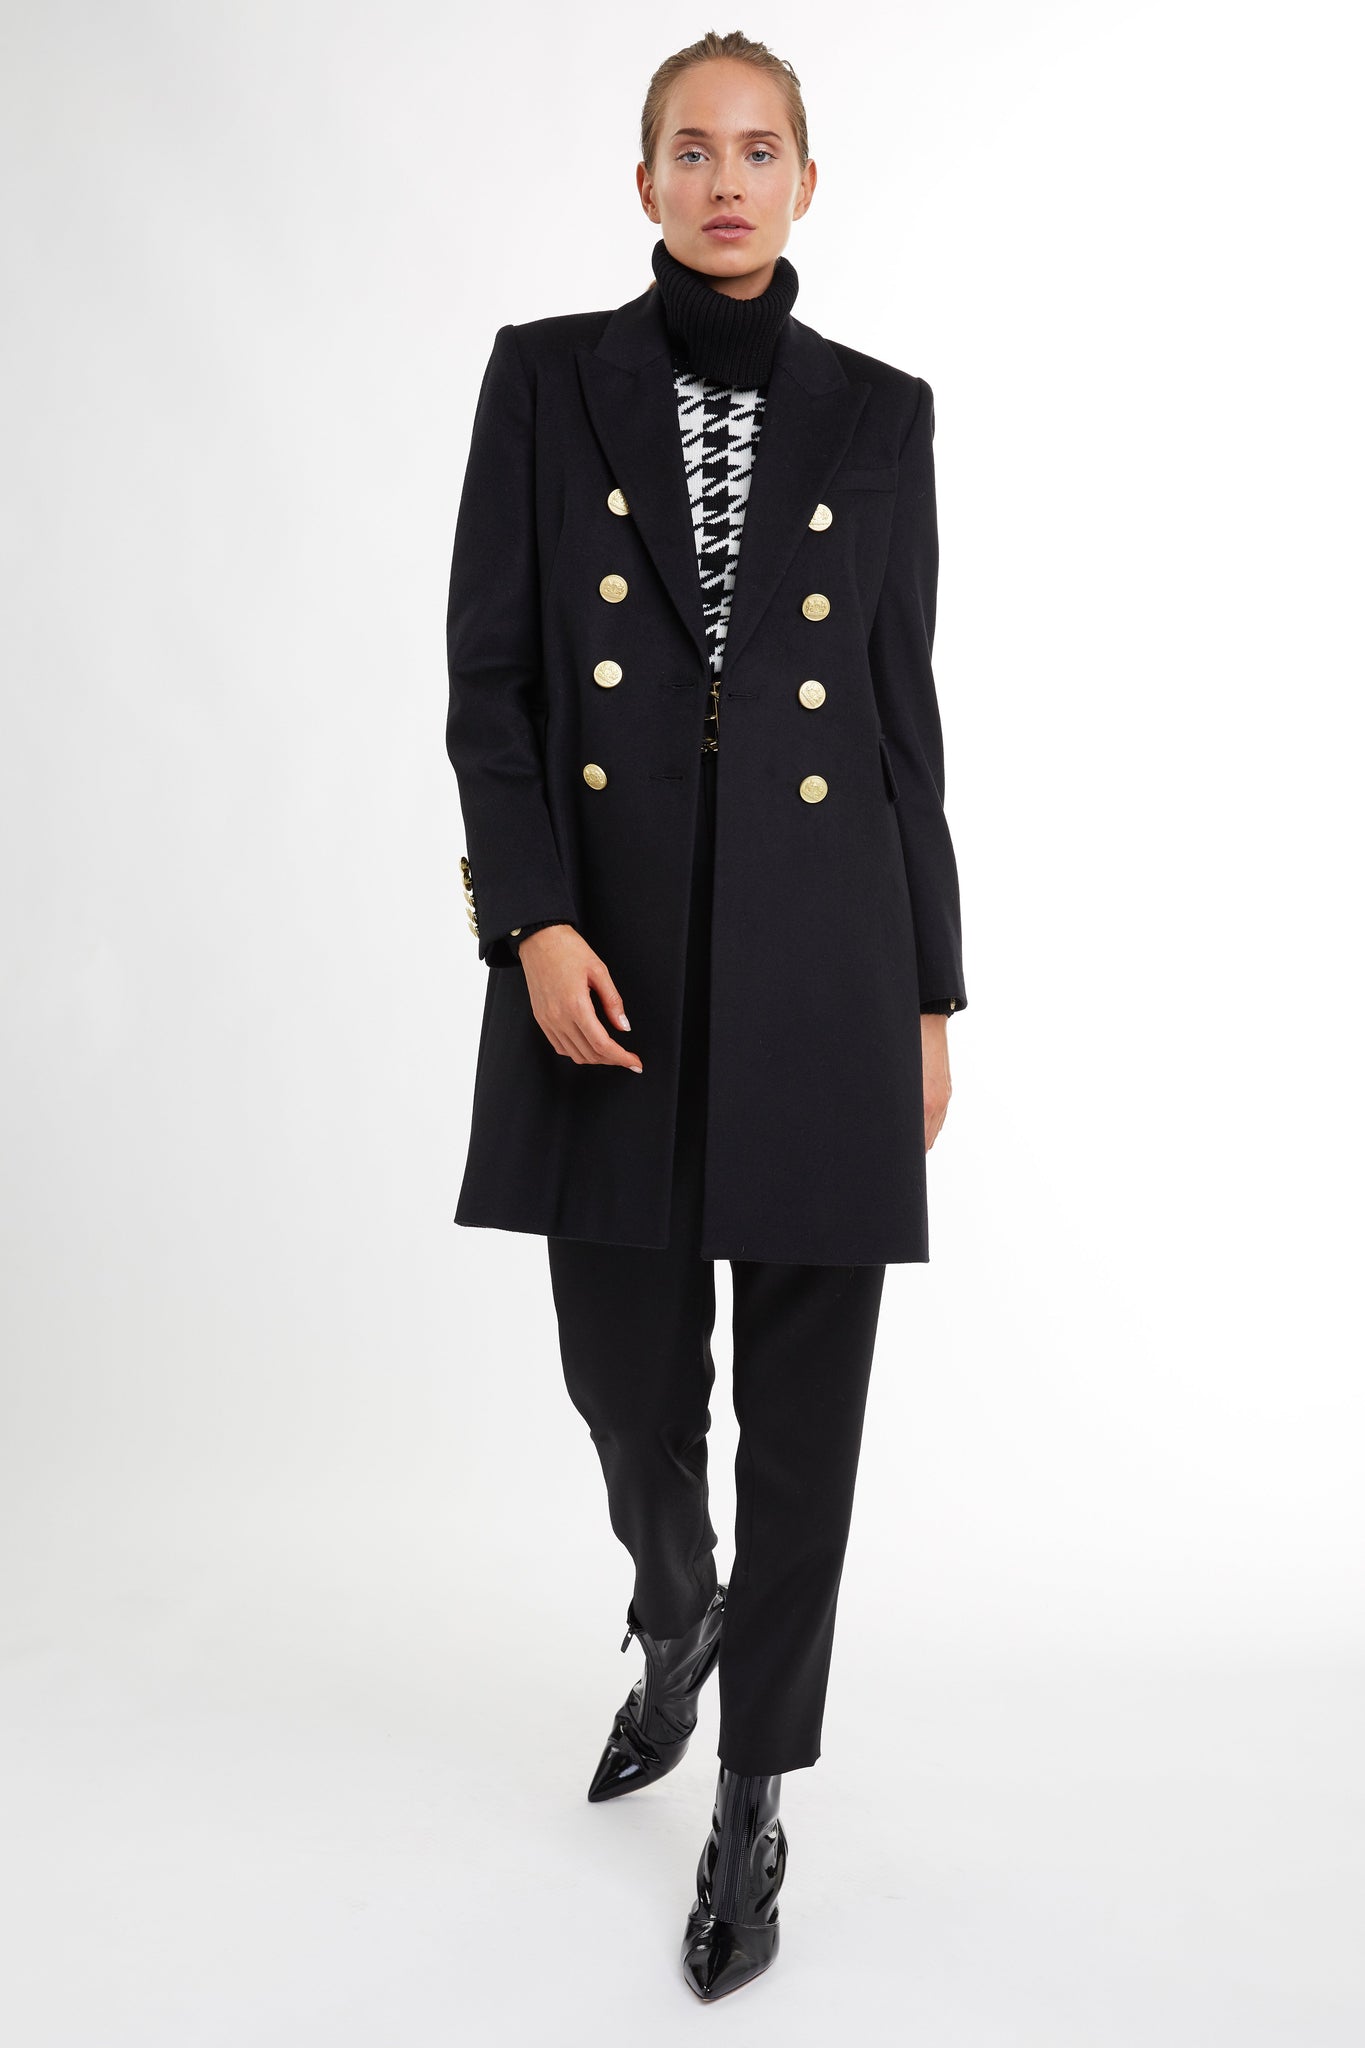 black wool womens coat with gold hardware